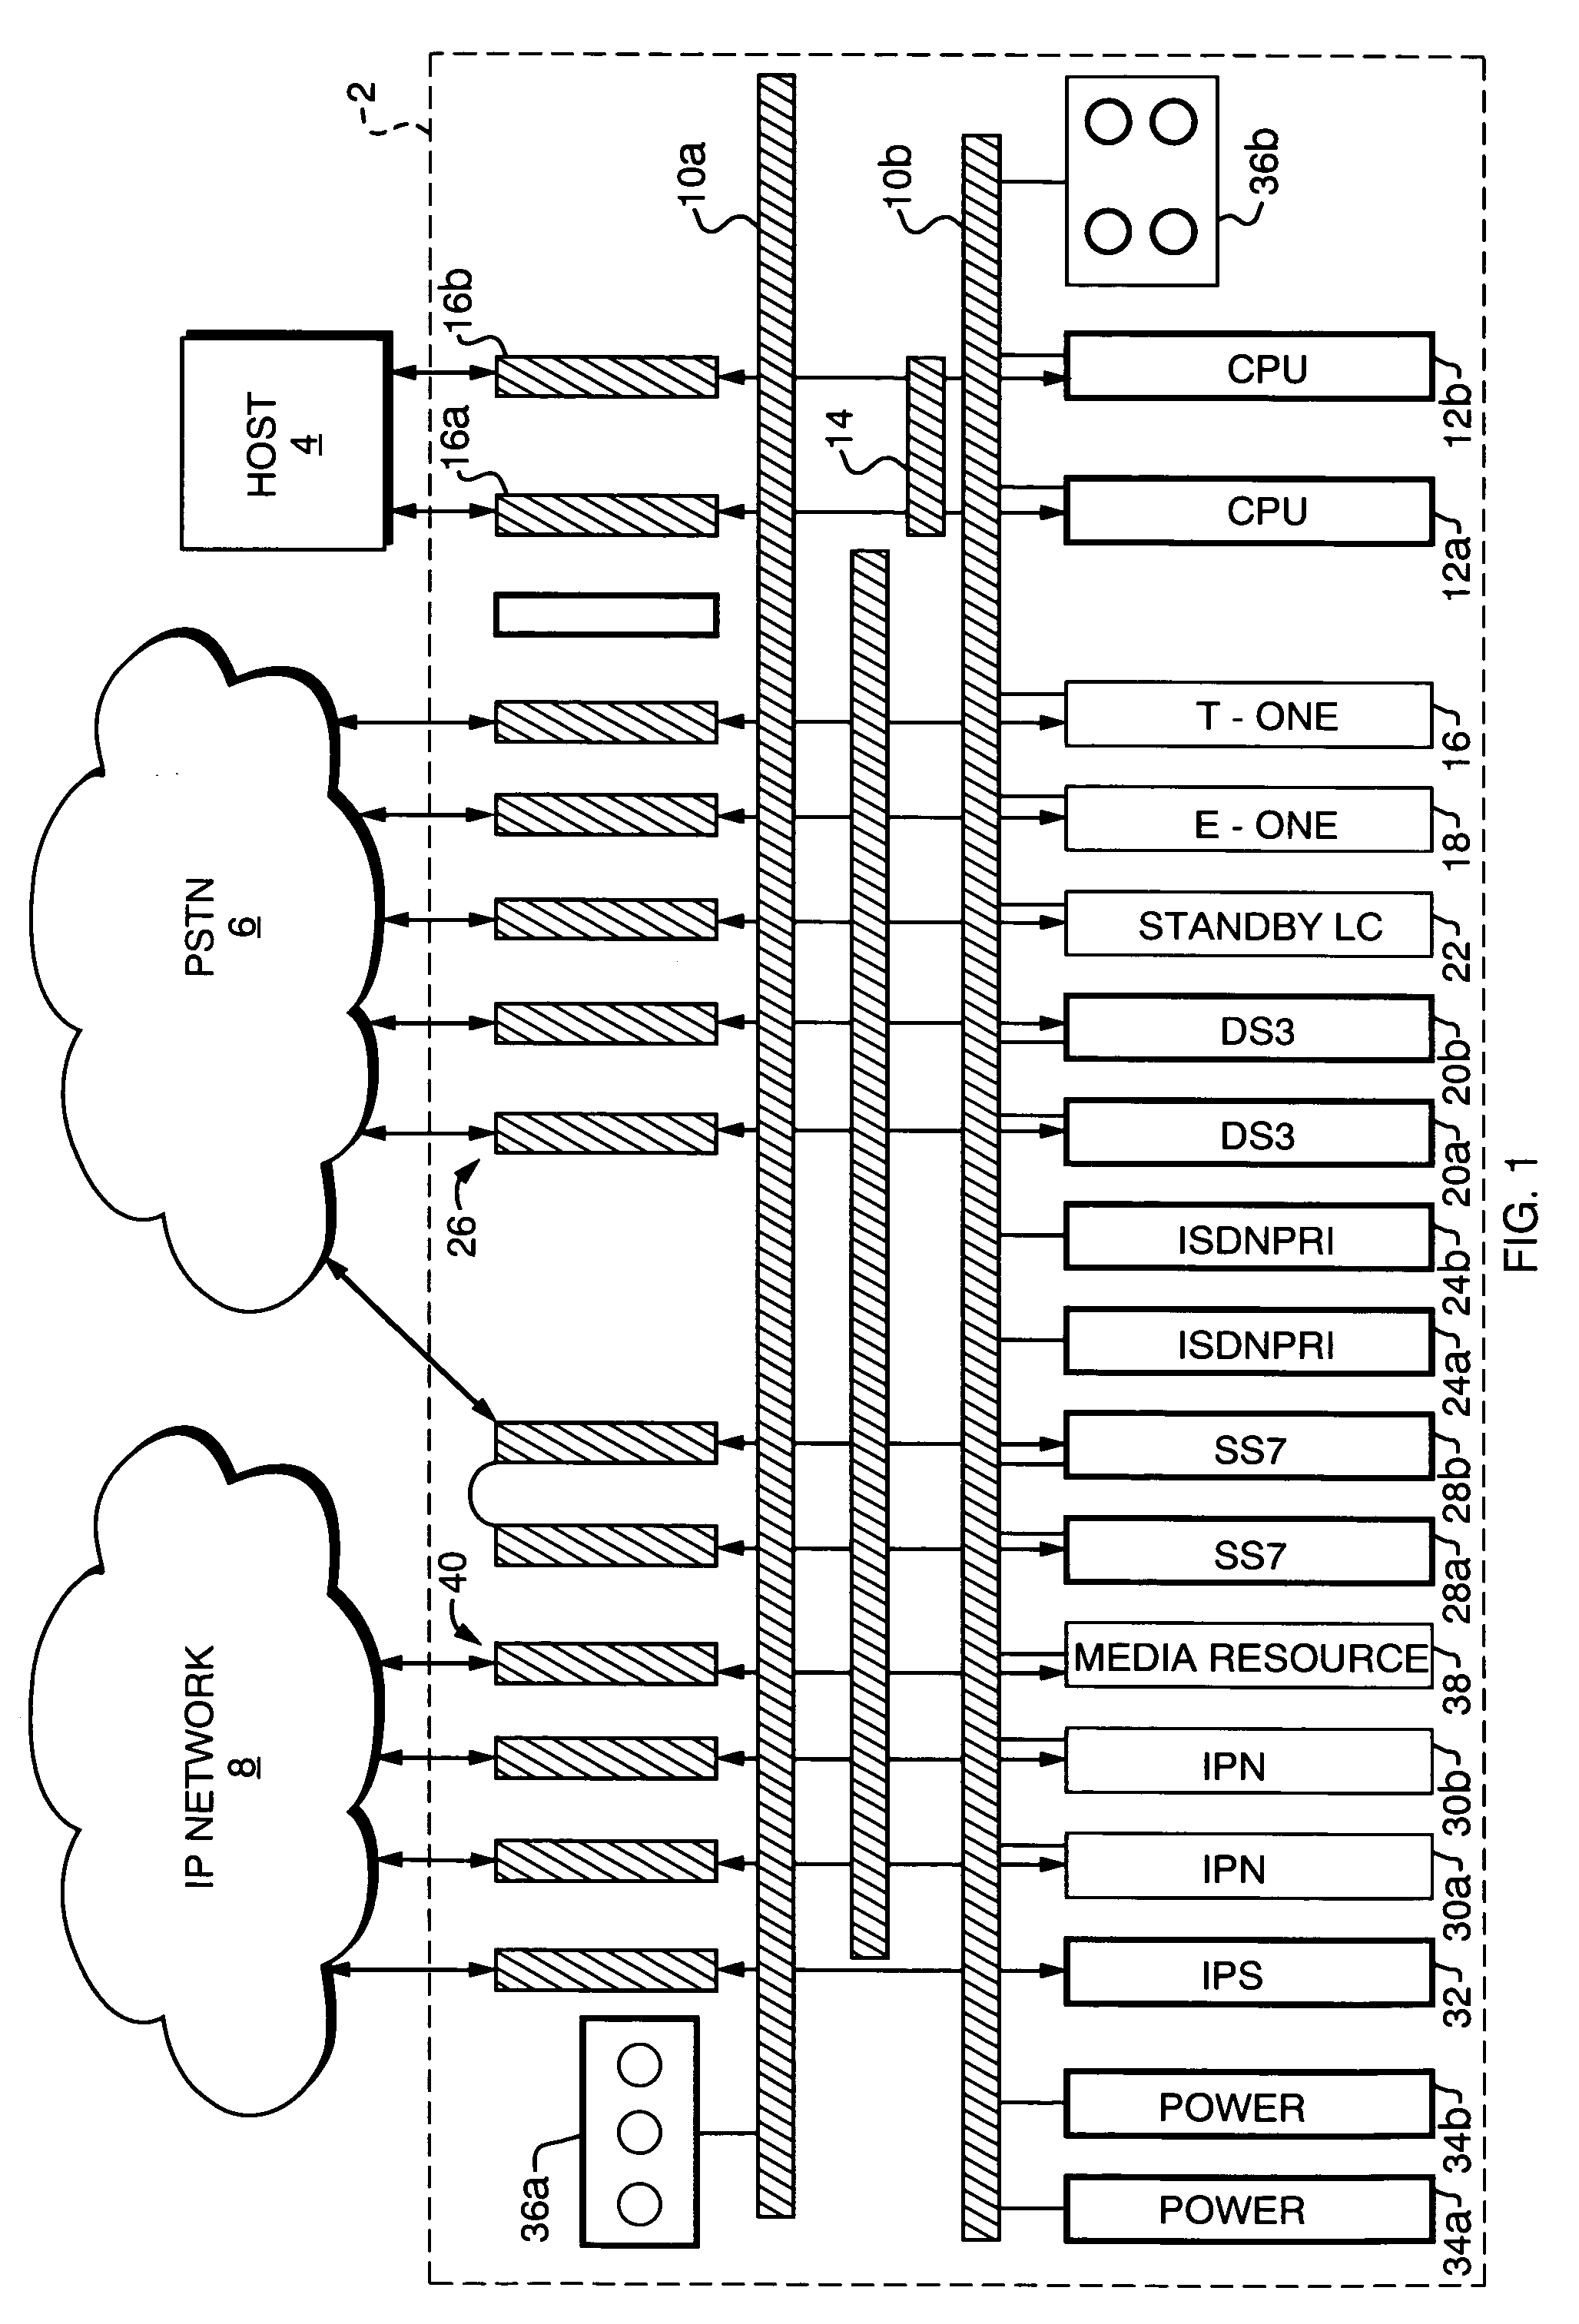 Hybrid switching architecture having dynamically assigned switching models for converged services platform